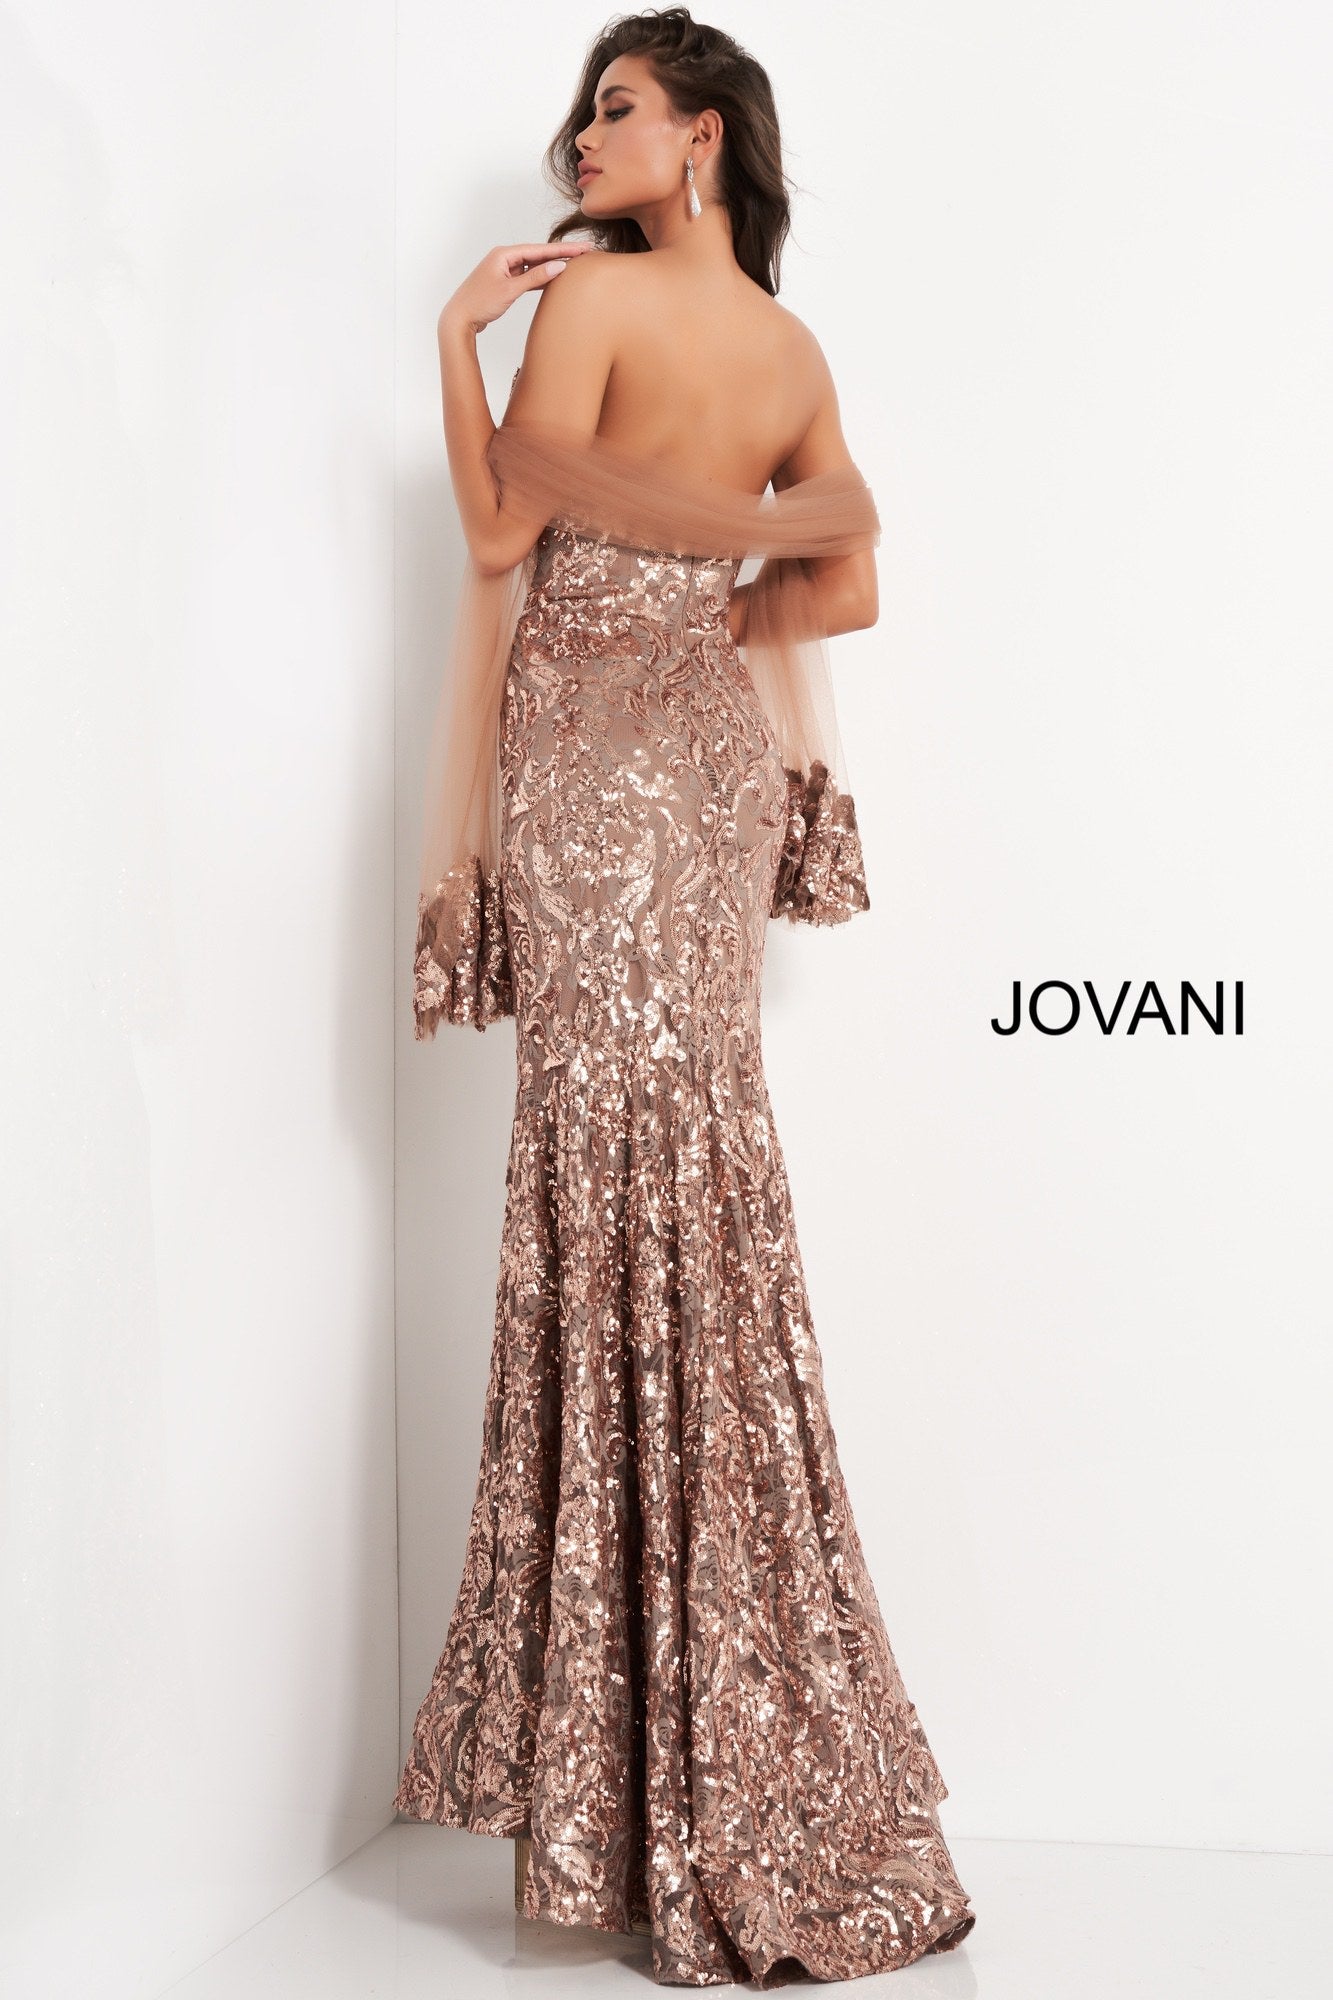 Jovani 05054 Long Strapless Sequins Formal Evening Gown Pageant Shaw Pageant Mother Of Floor length form fitting copper sequin embellished Jovani mother of the bride dress 05054 with matching shawl features strapless bodice with V neck.  Sizes: 00-24  Colors: Copper, Navy